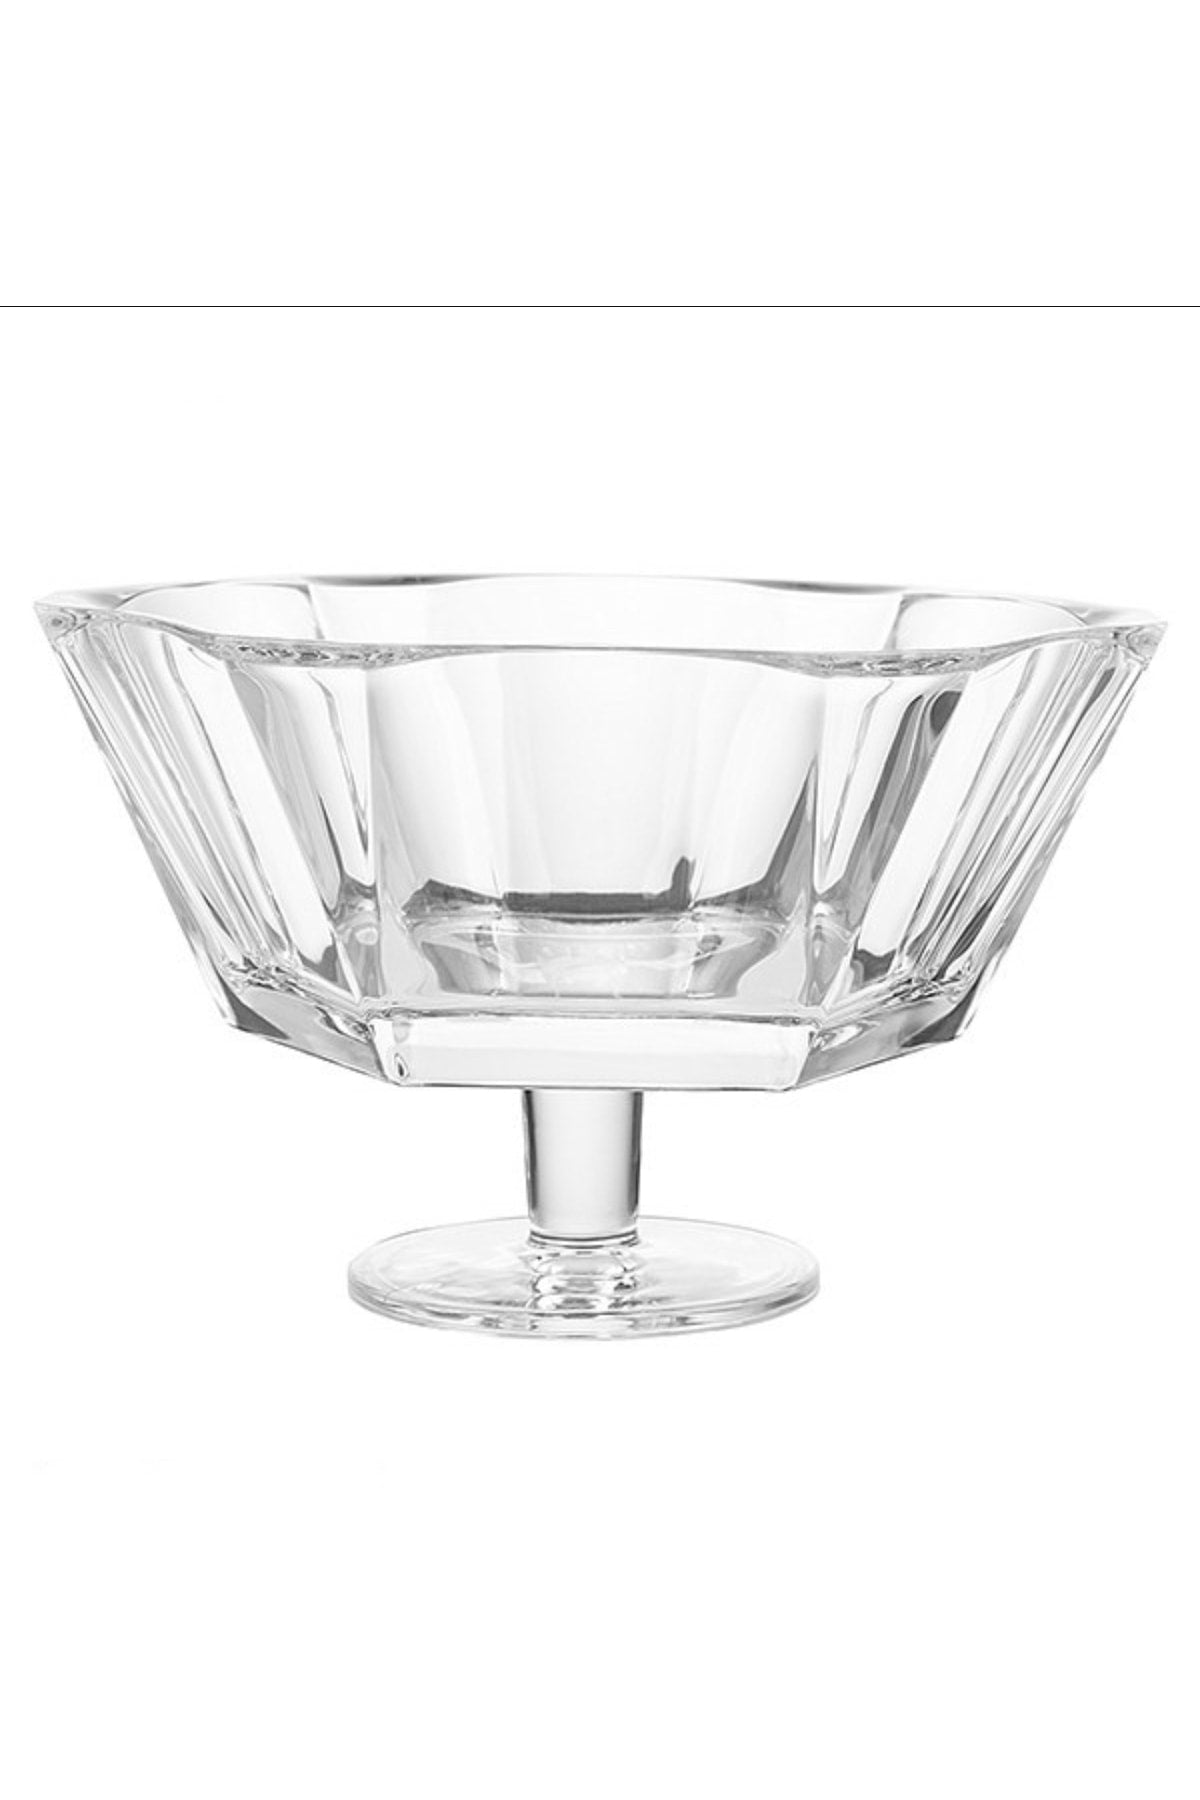 Nude Reflection Crystal Bowl with Foot